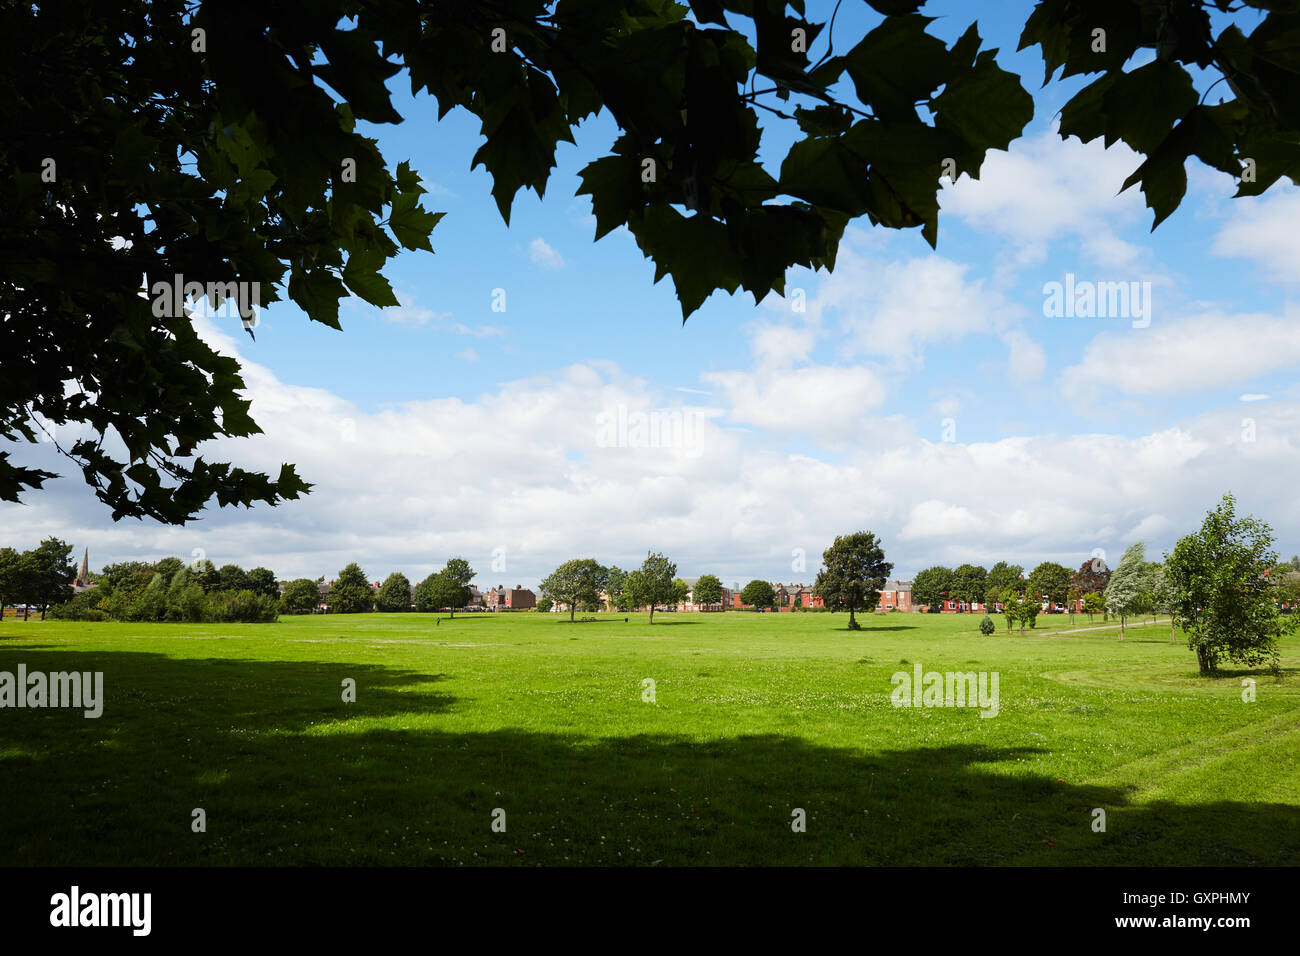 Greenback playing fields Levenshulme Manchester   Park open space public recreation recreational play playing fields council mai Stock Photo